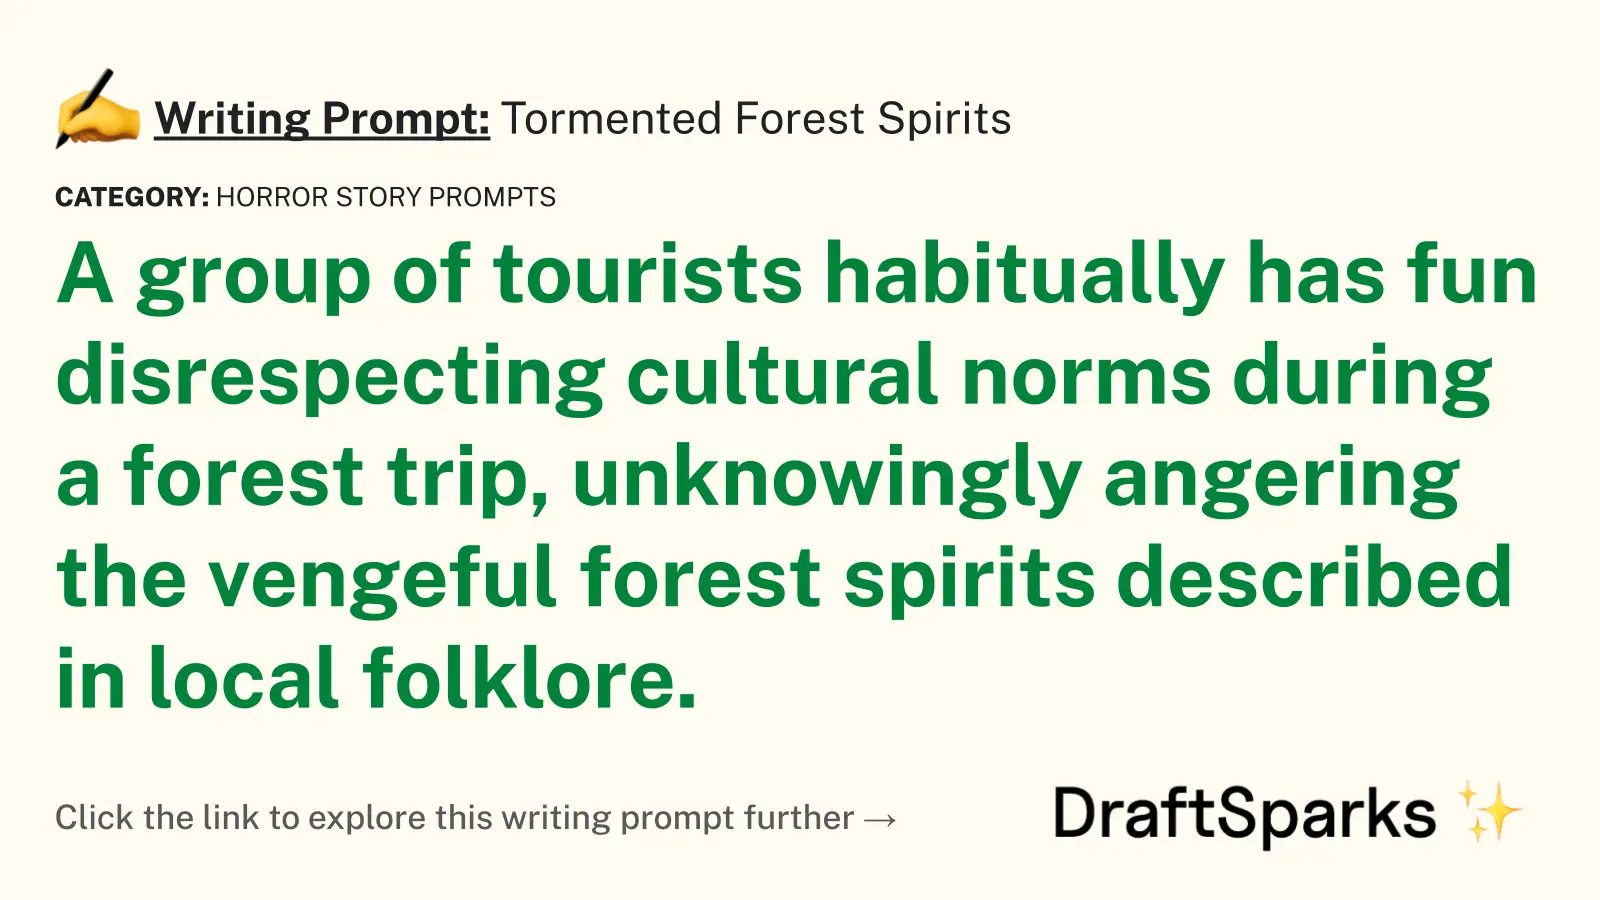 Tormented Forest Spirits